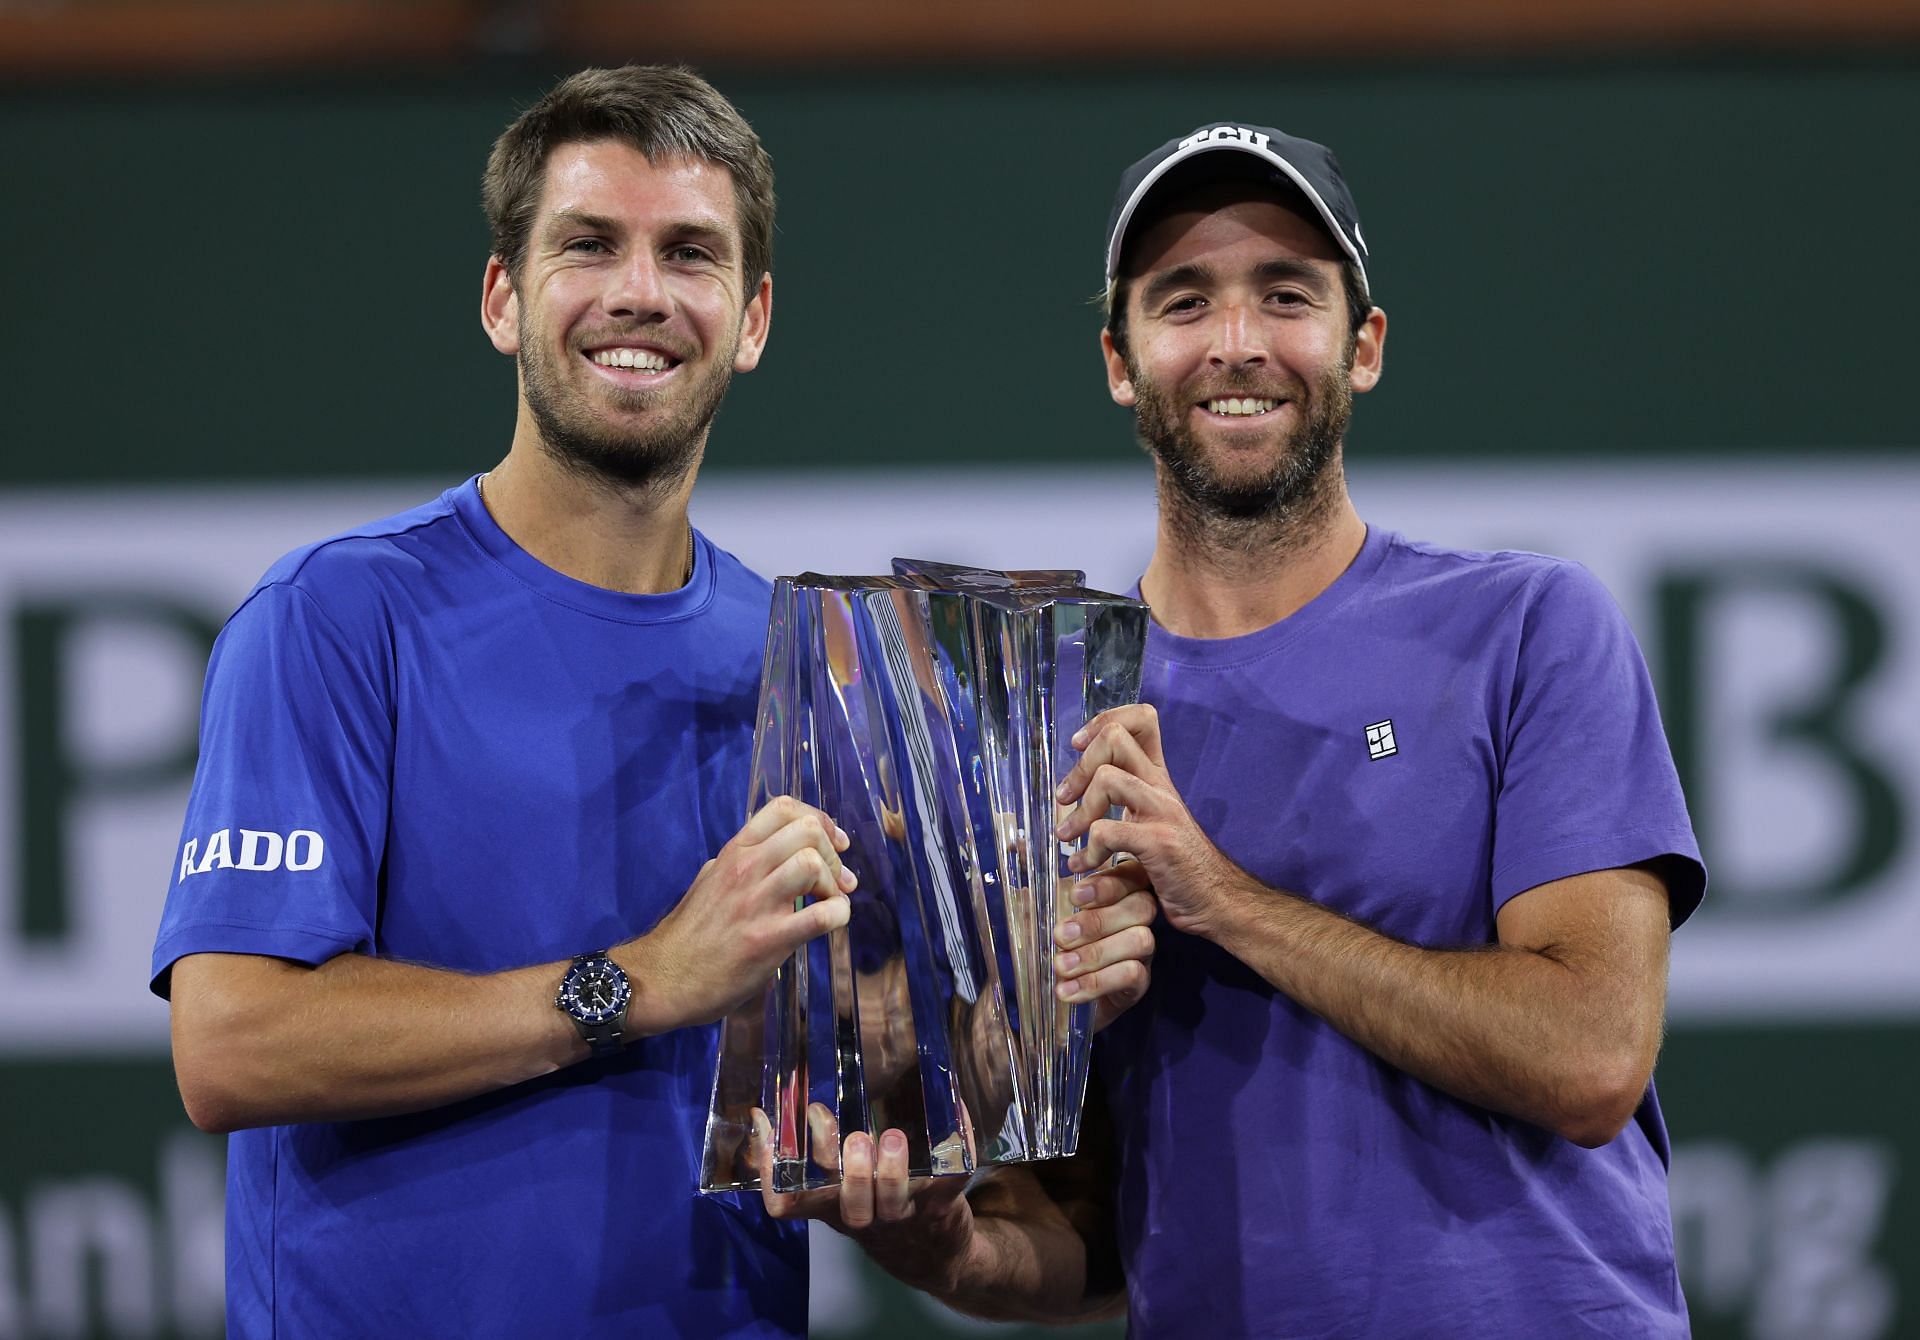 Cameron Norrie (L) celebrates with coach Facundo Lugones (R) after winning the 2021 Indian Wells Masters